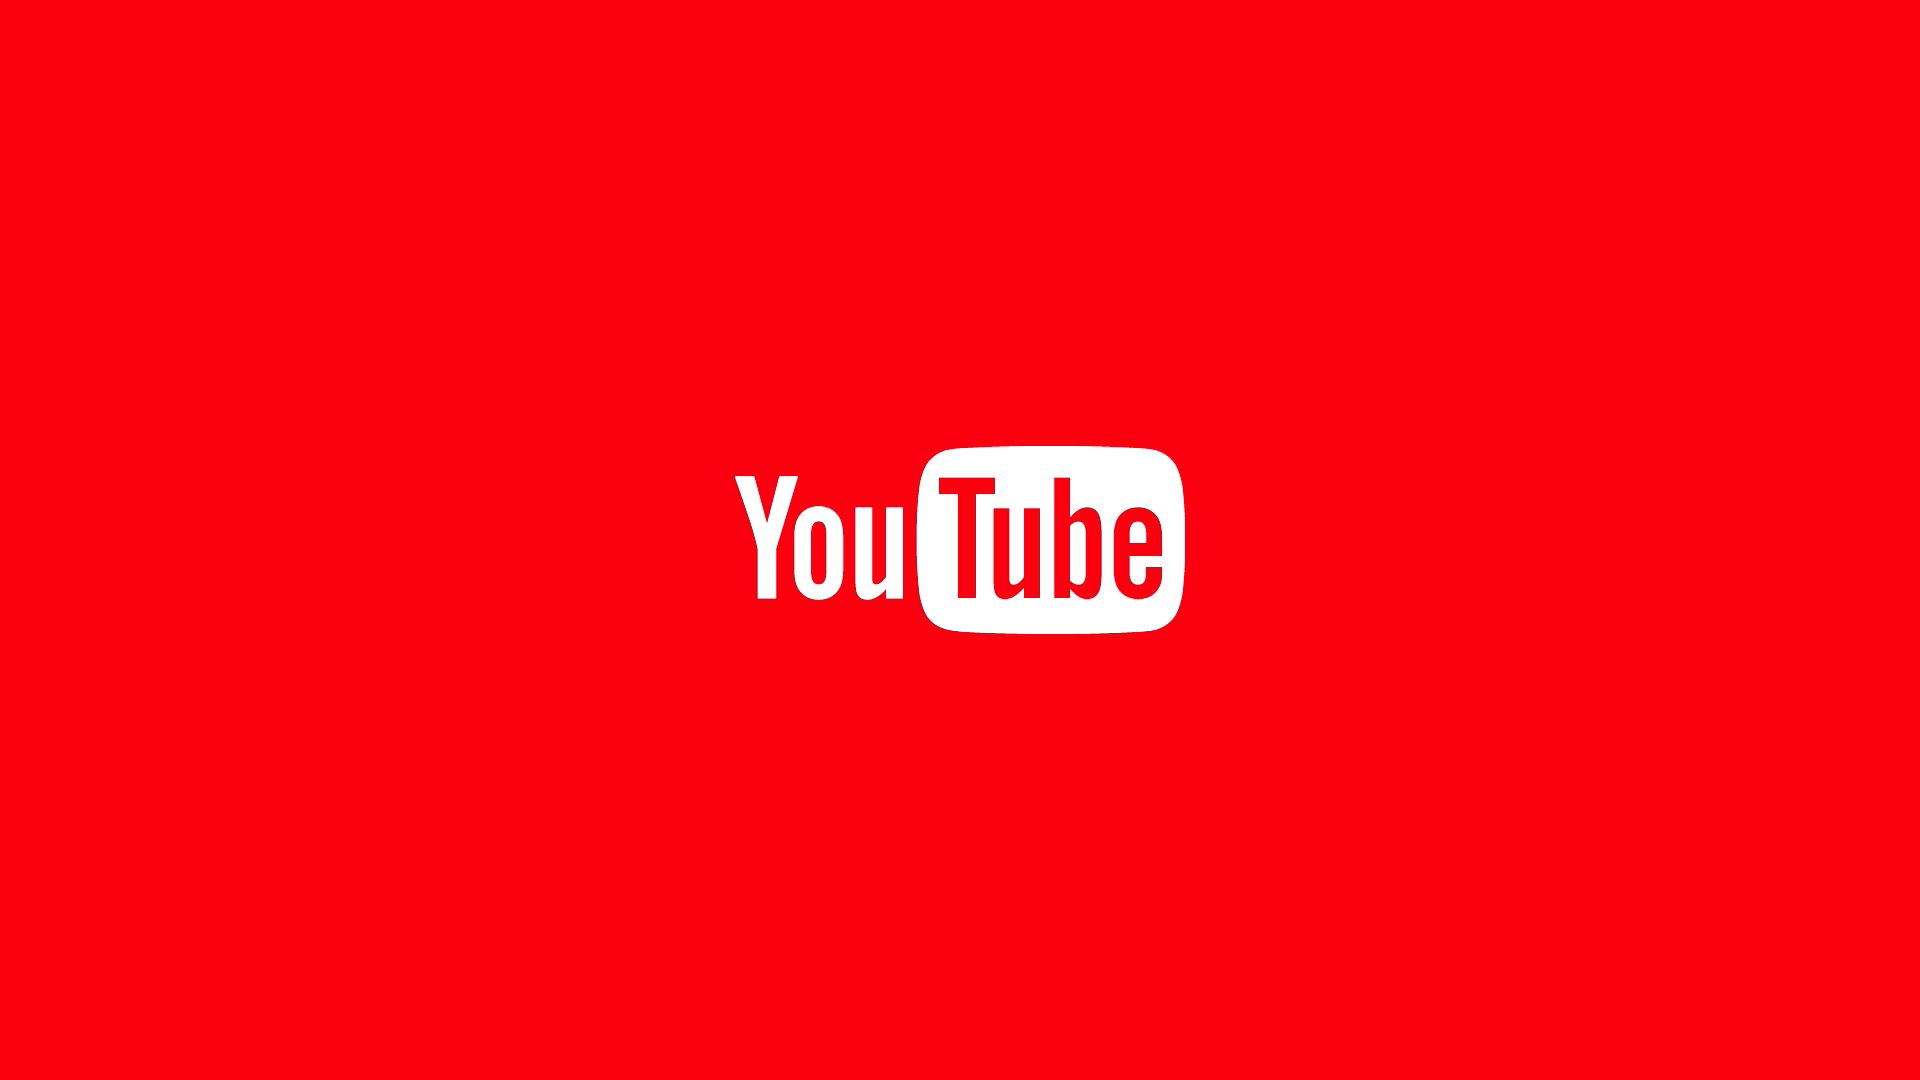 Cool Youtube Wallpapers Wallpapers